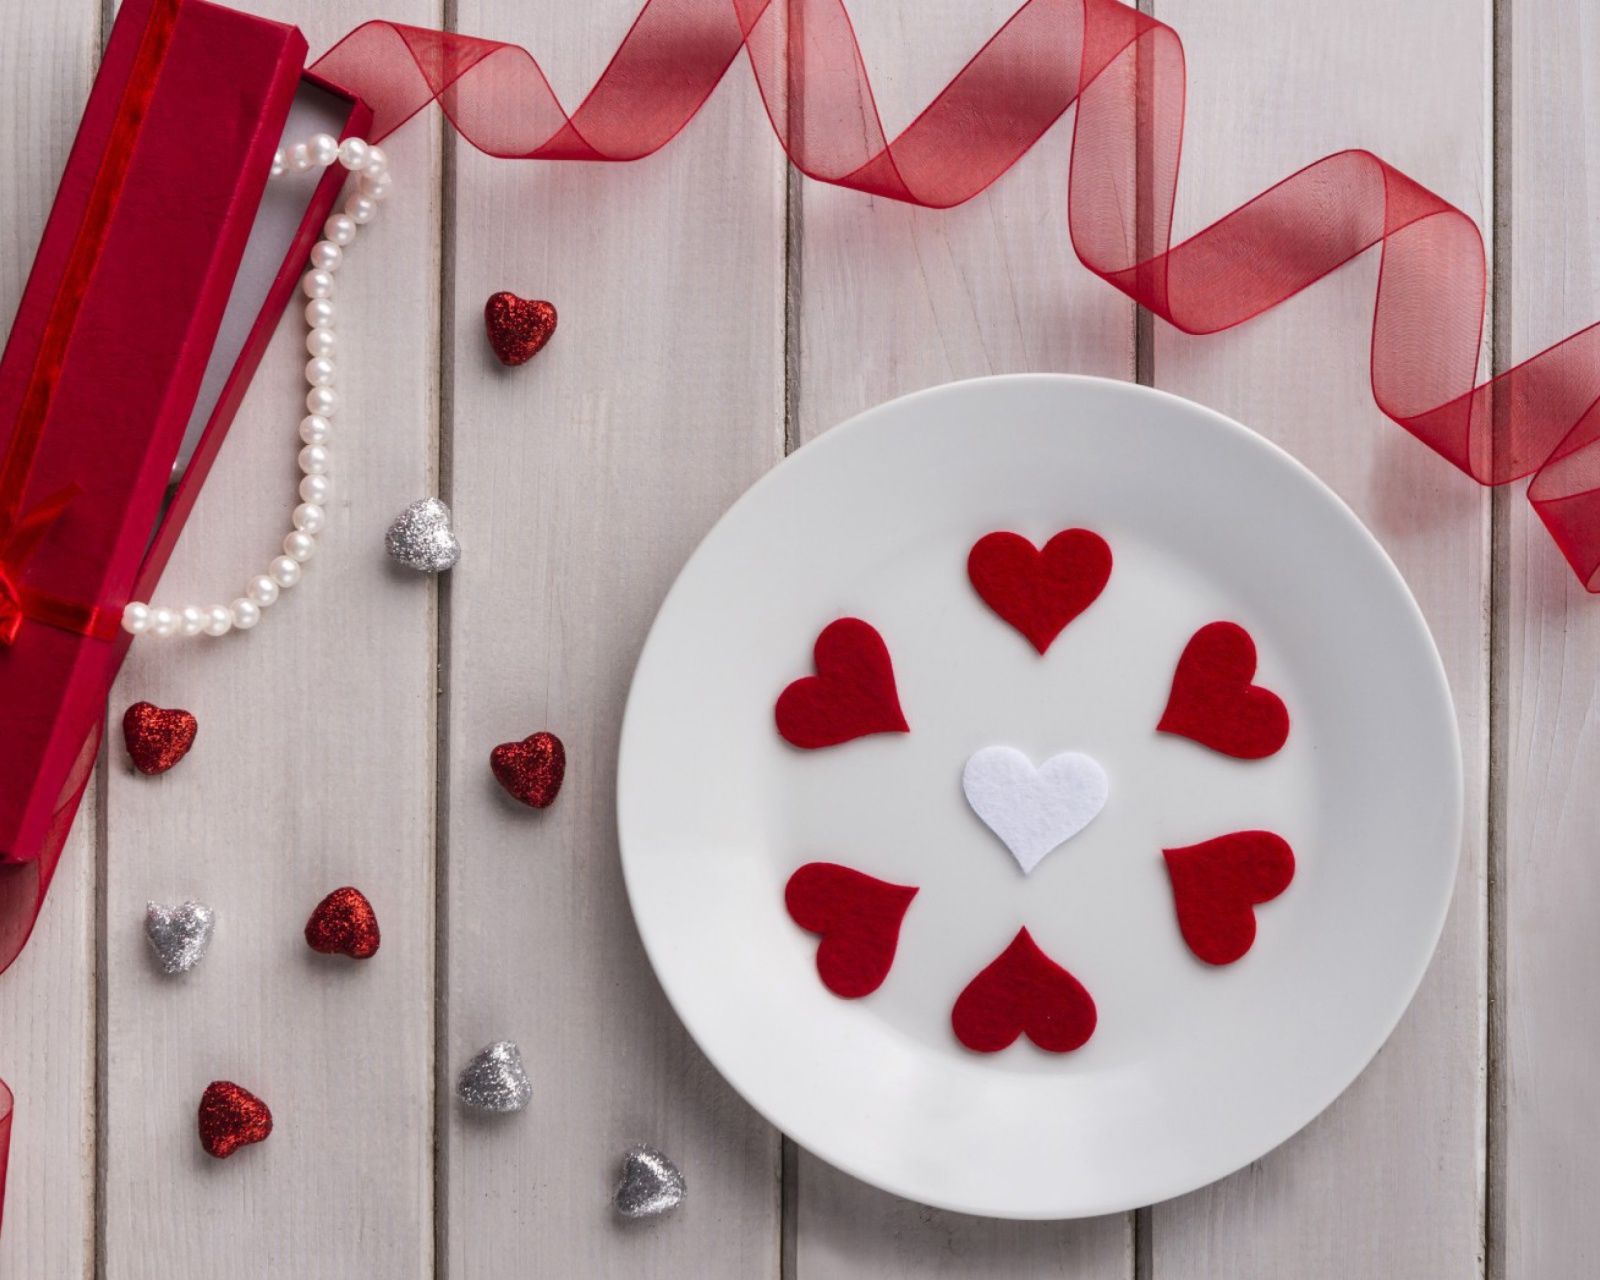 Romantic Valentines Day Table Settings wallpaper 1600x1280